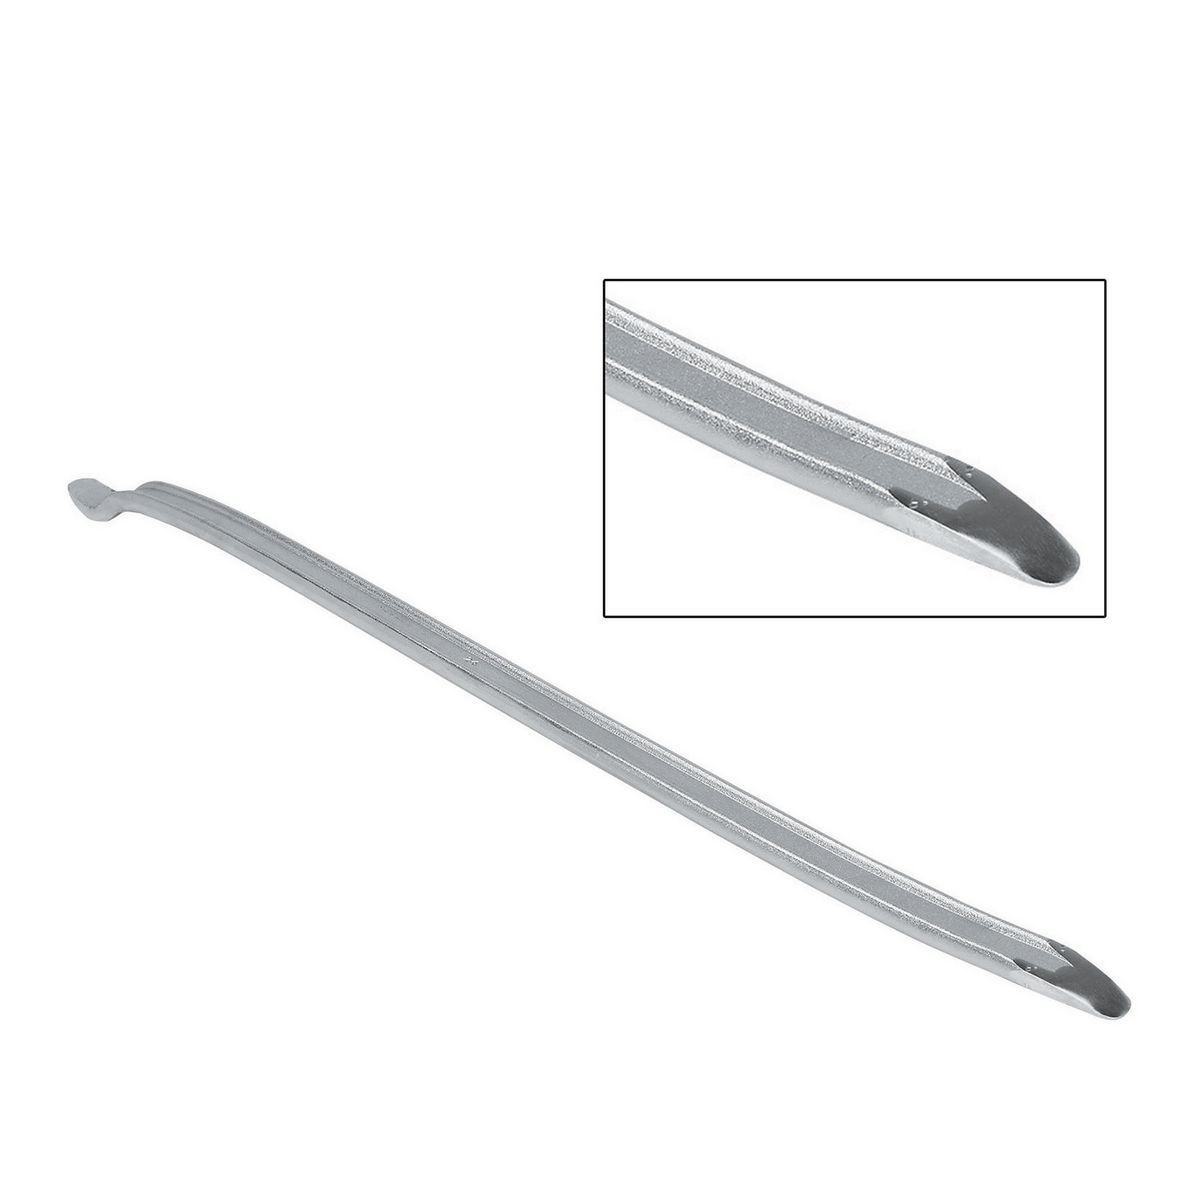 PITTSBURGH AUTOMOTIVE 24 in. General Purpose Tire Iron - Item 93230 / 61603